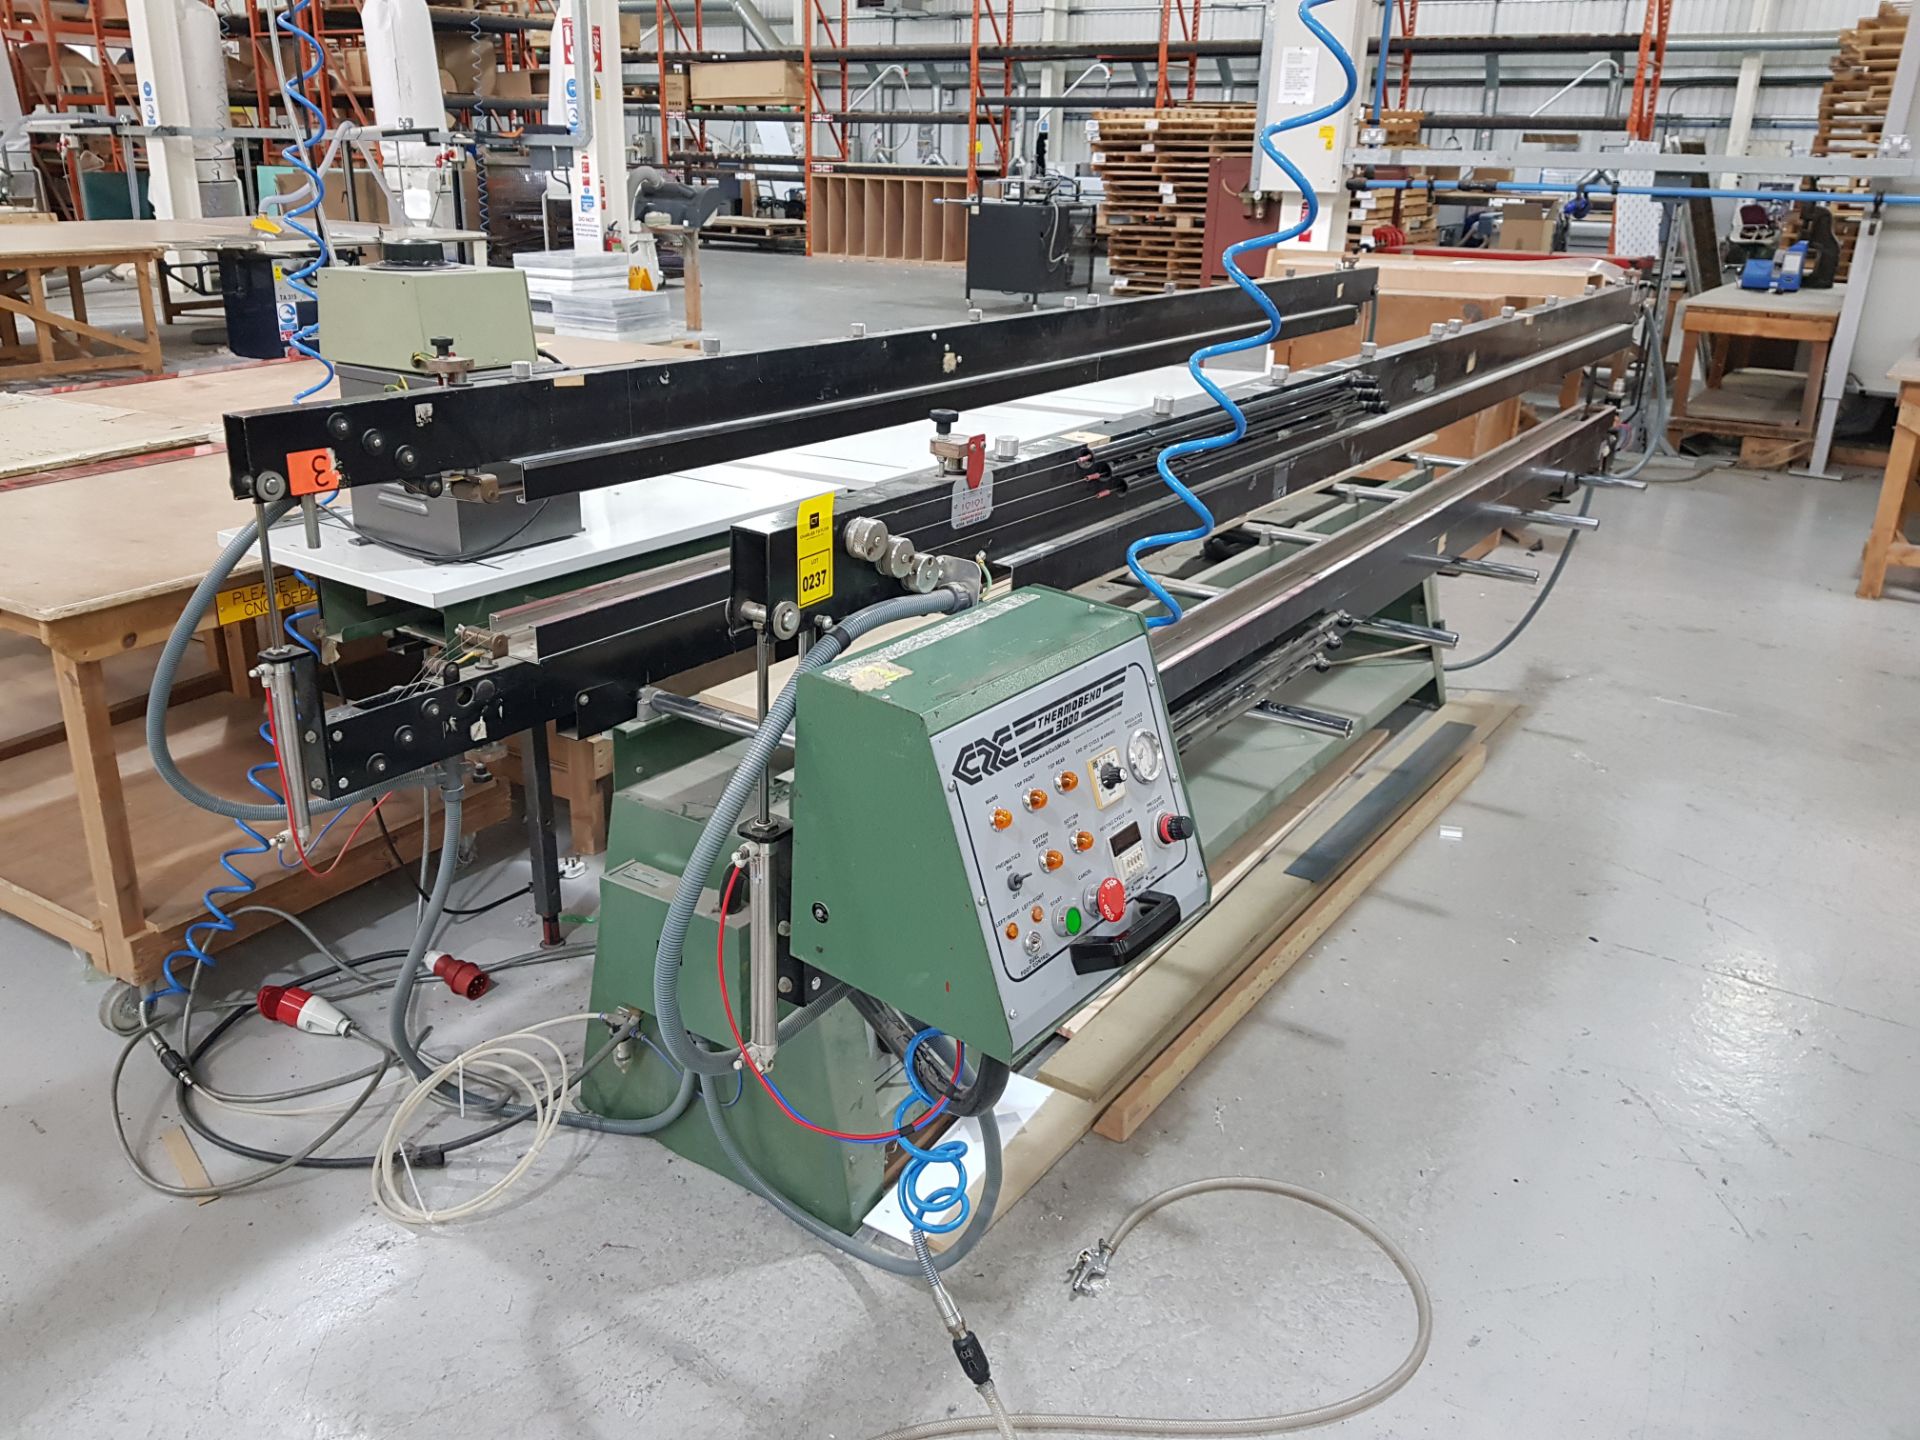 1 X THERMOBEND 3000 WIRE STRIP HEATER - CR CLARKE - SN 300007 - 240 V - MODEL - 3000 D (ASSETS